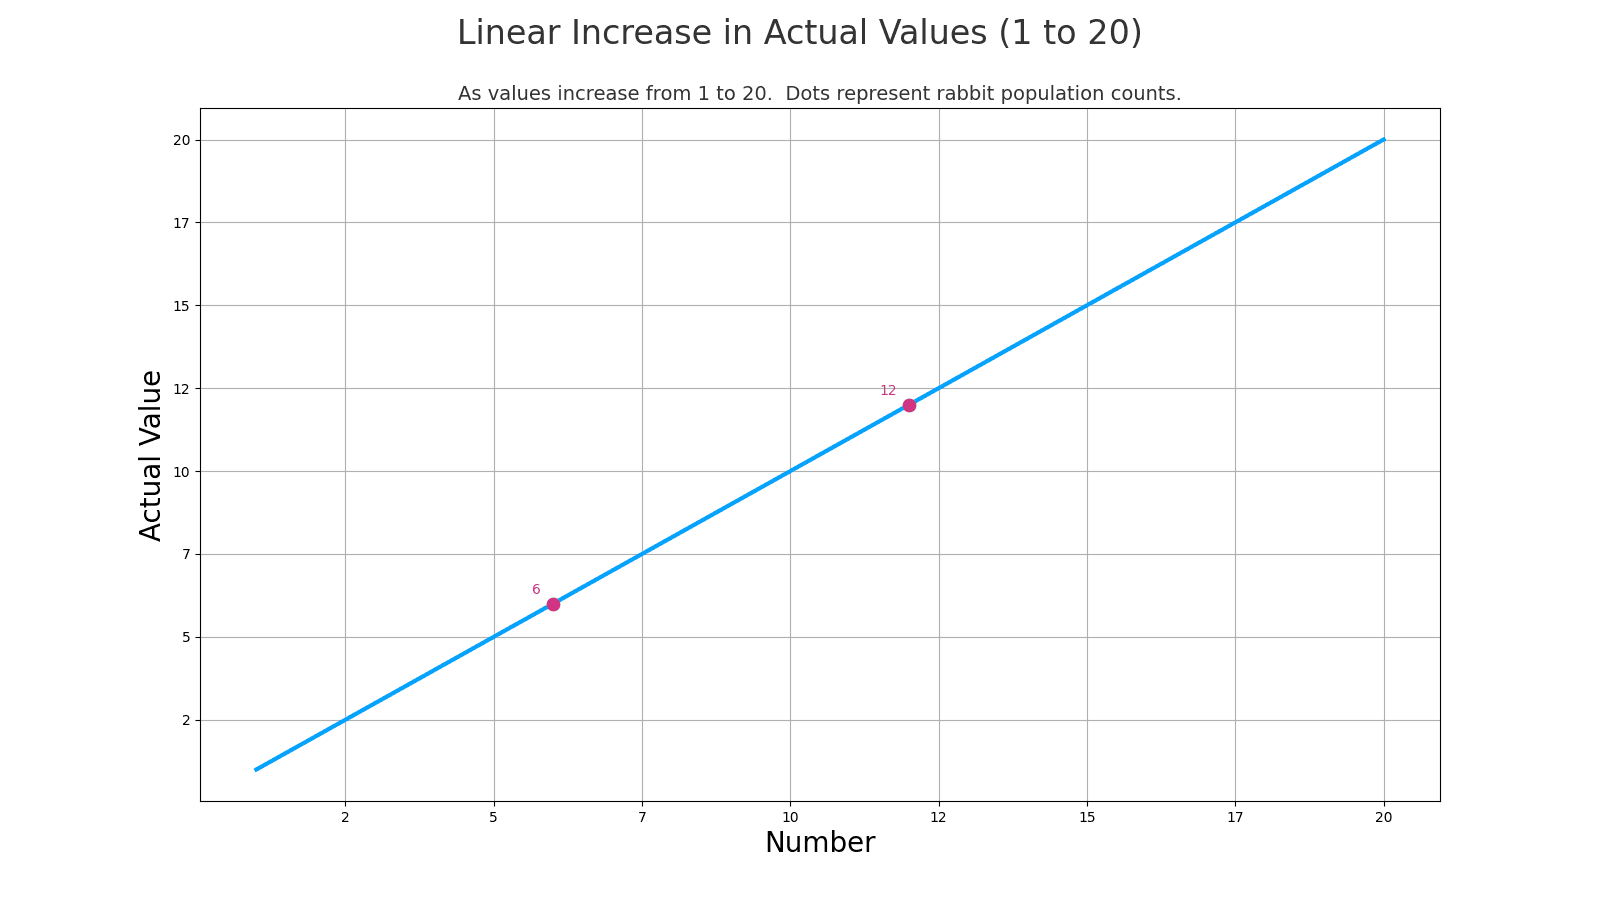 Linear growth to 20.